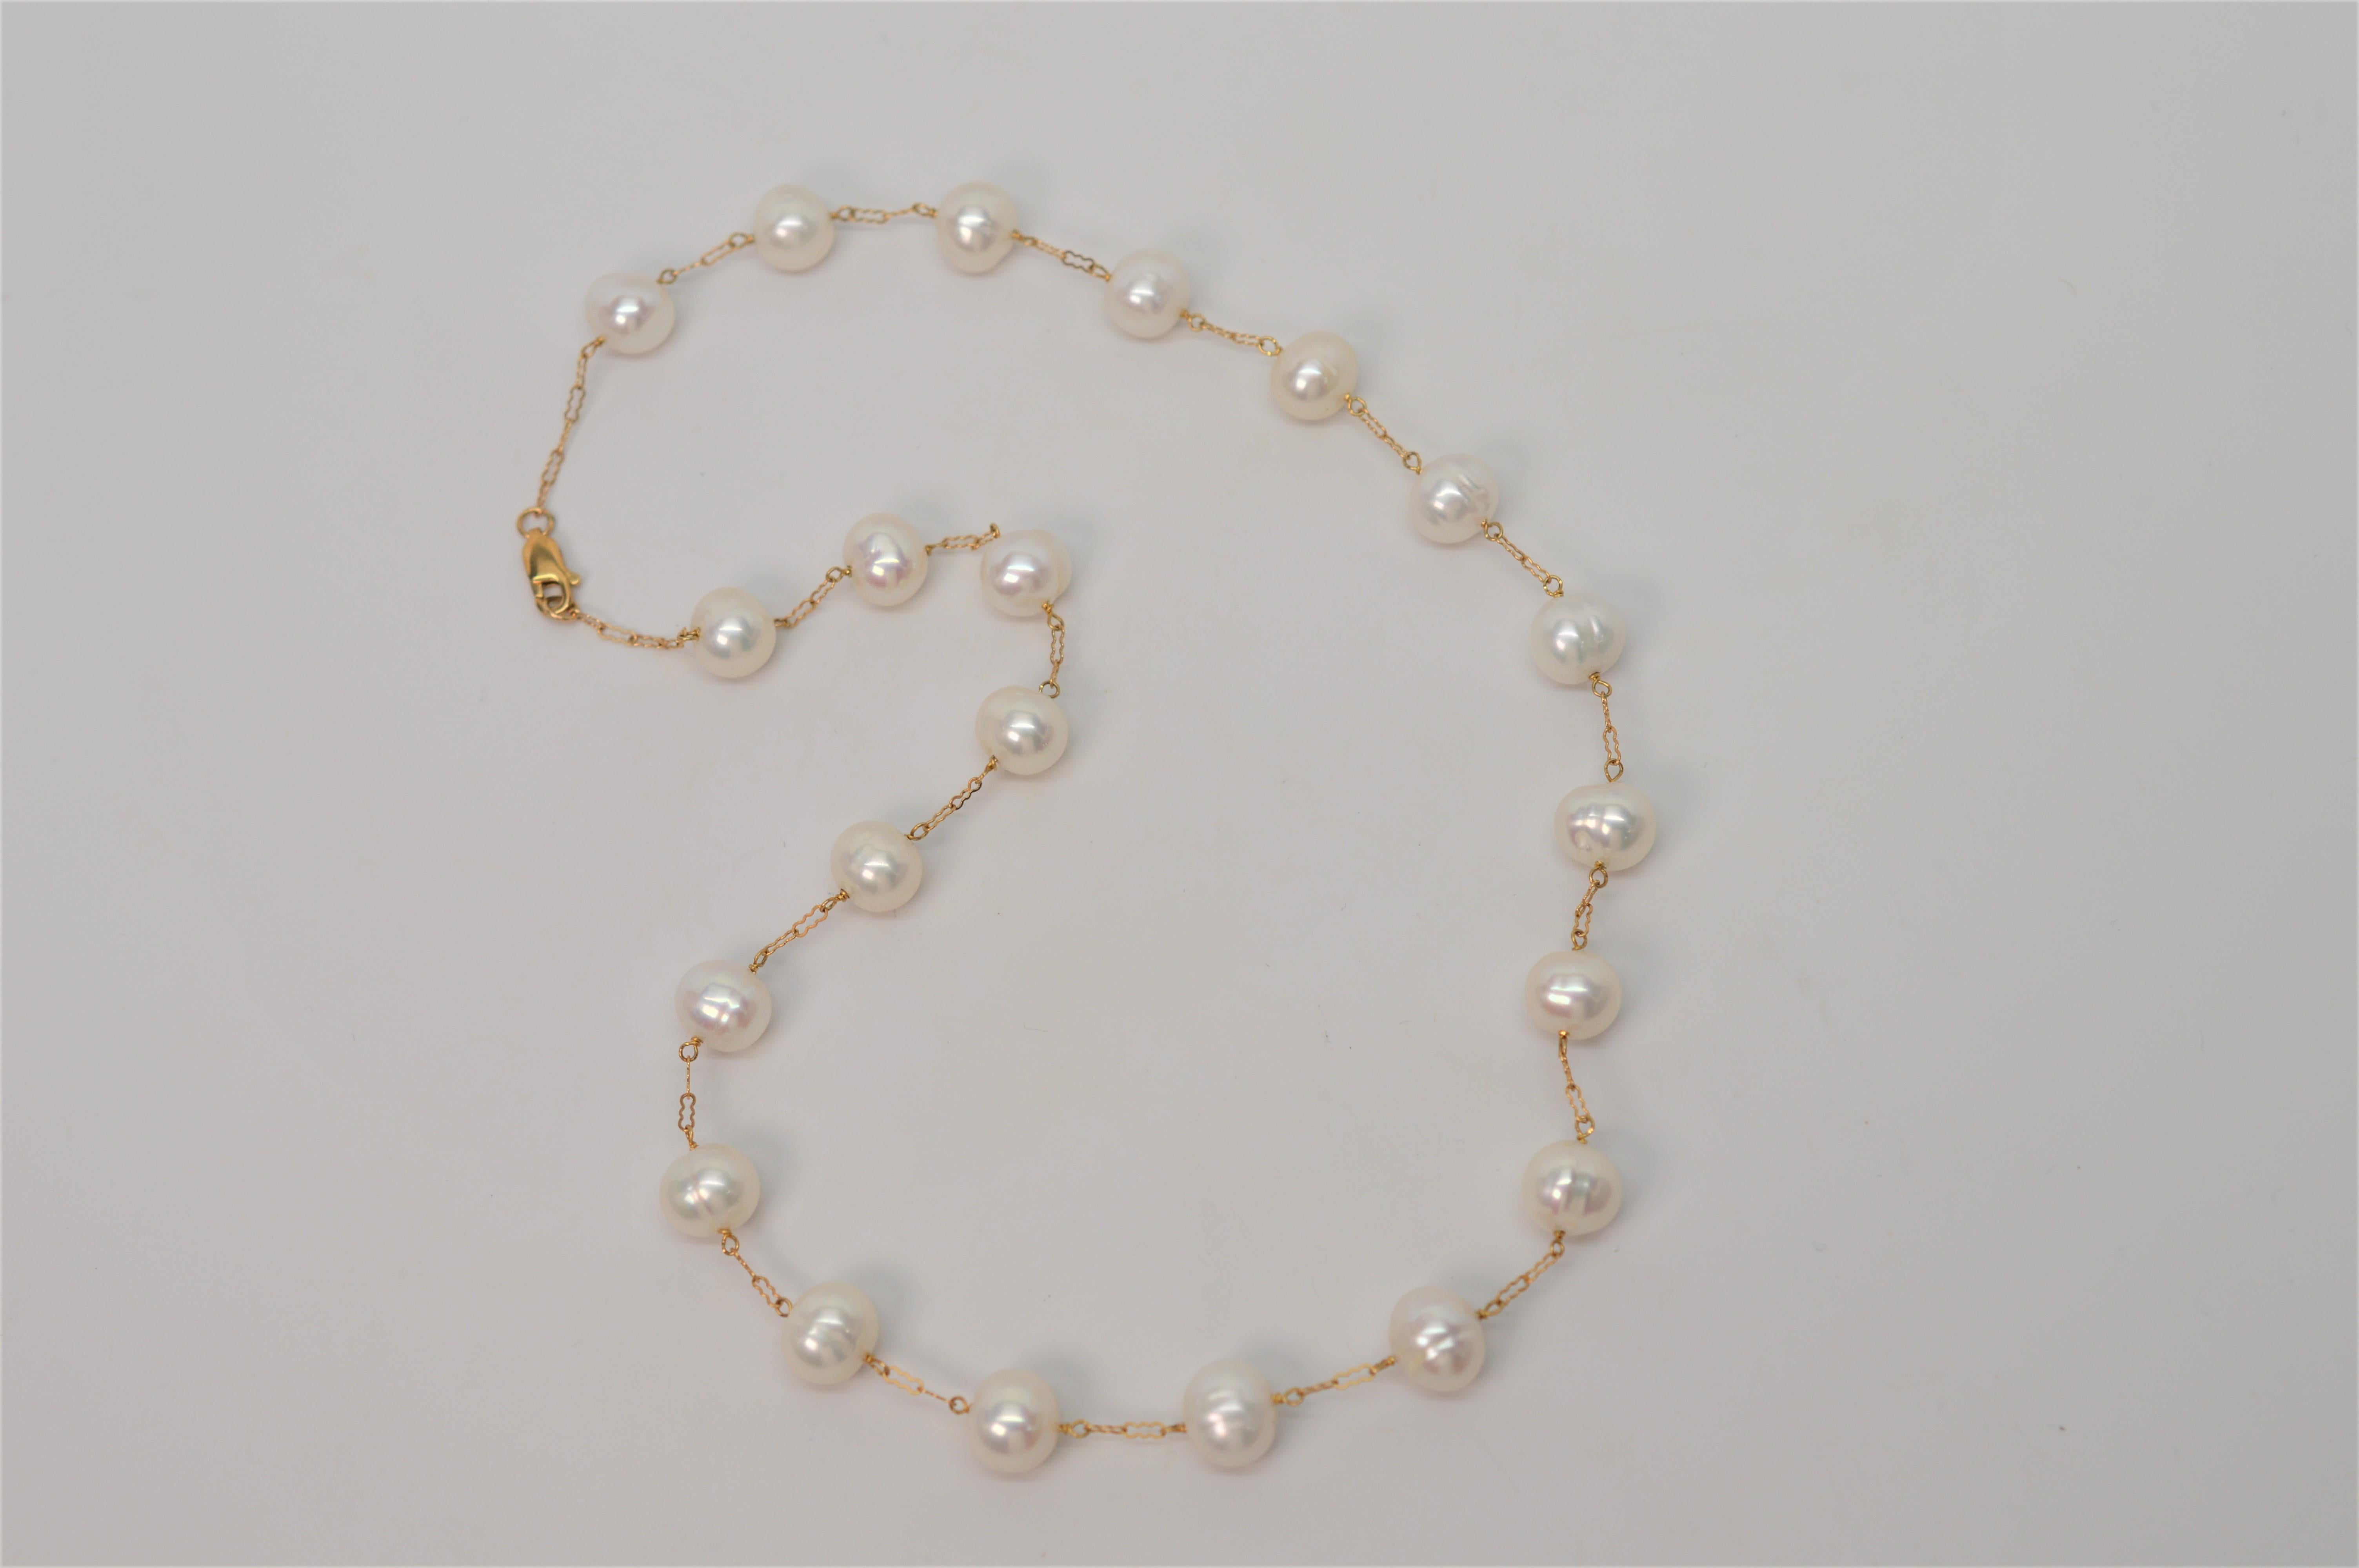 Nine millimeter naturally ringed White Akoya Pearls float on this attractive 14 Karat Yellow Gold Open Link Chain creating an elegant 20 inch necklace that is always fashionable and can complete any look from dress to jeans . Finished with a lobster